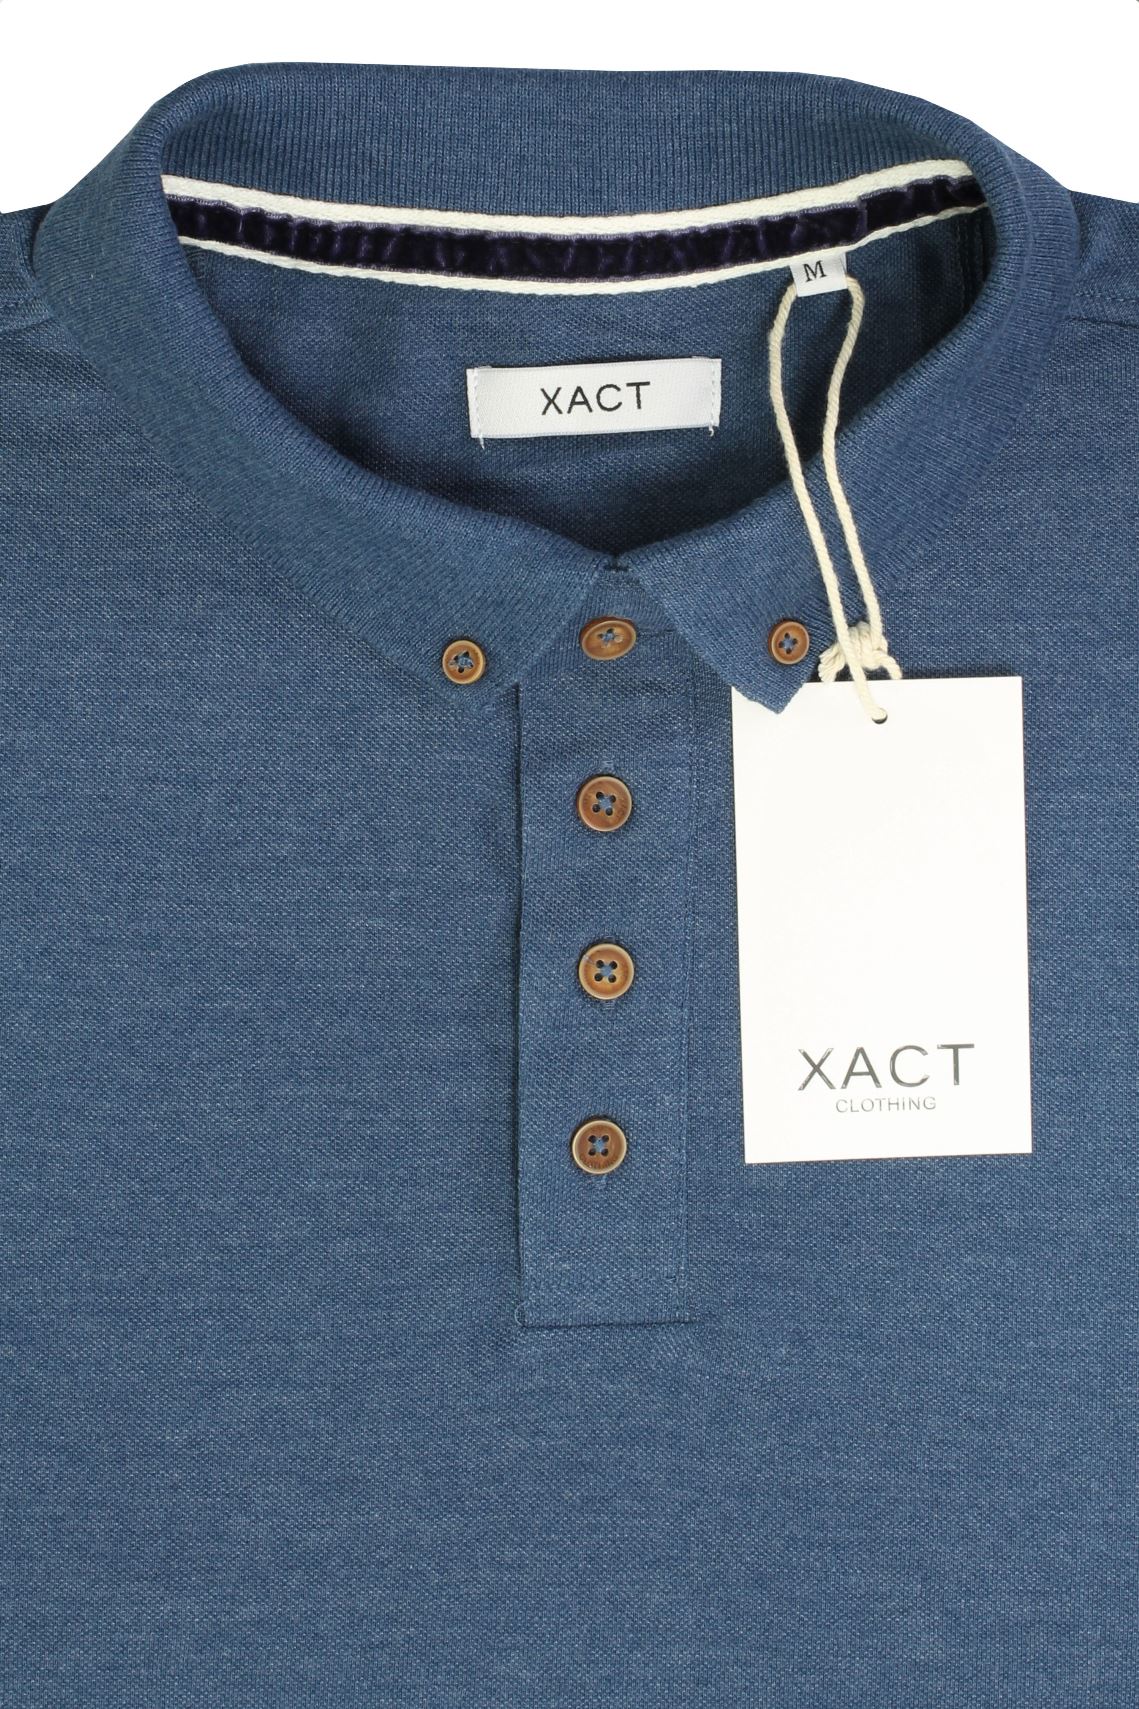 Mens Polo T-Shirt by Xact Long Sleeved (Vintage Blue)-4